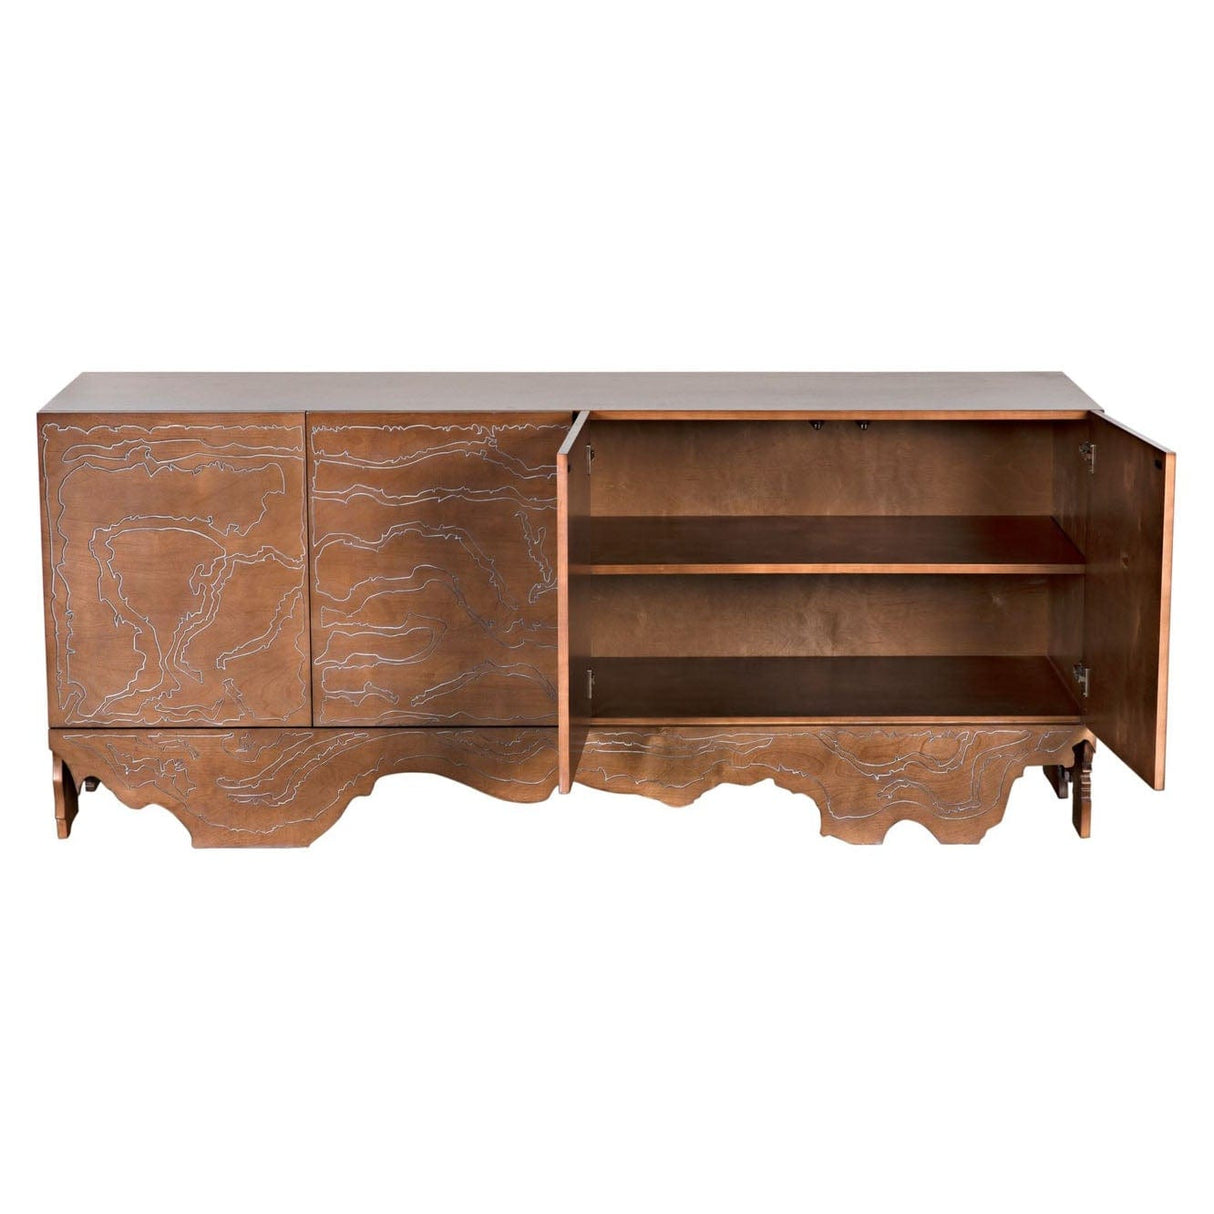 CFC Hendra Sideboard - HOLD FOR PRICING Furniture cfc-FF214